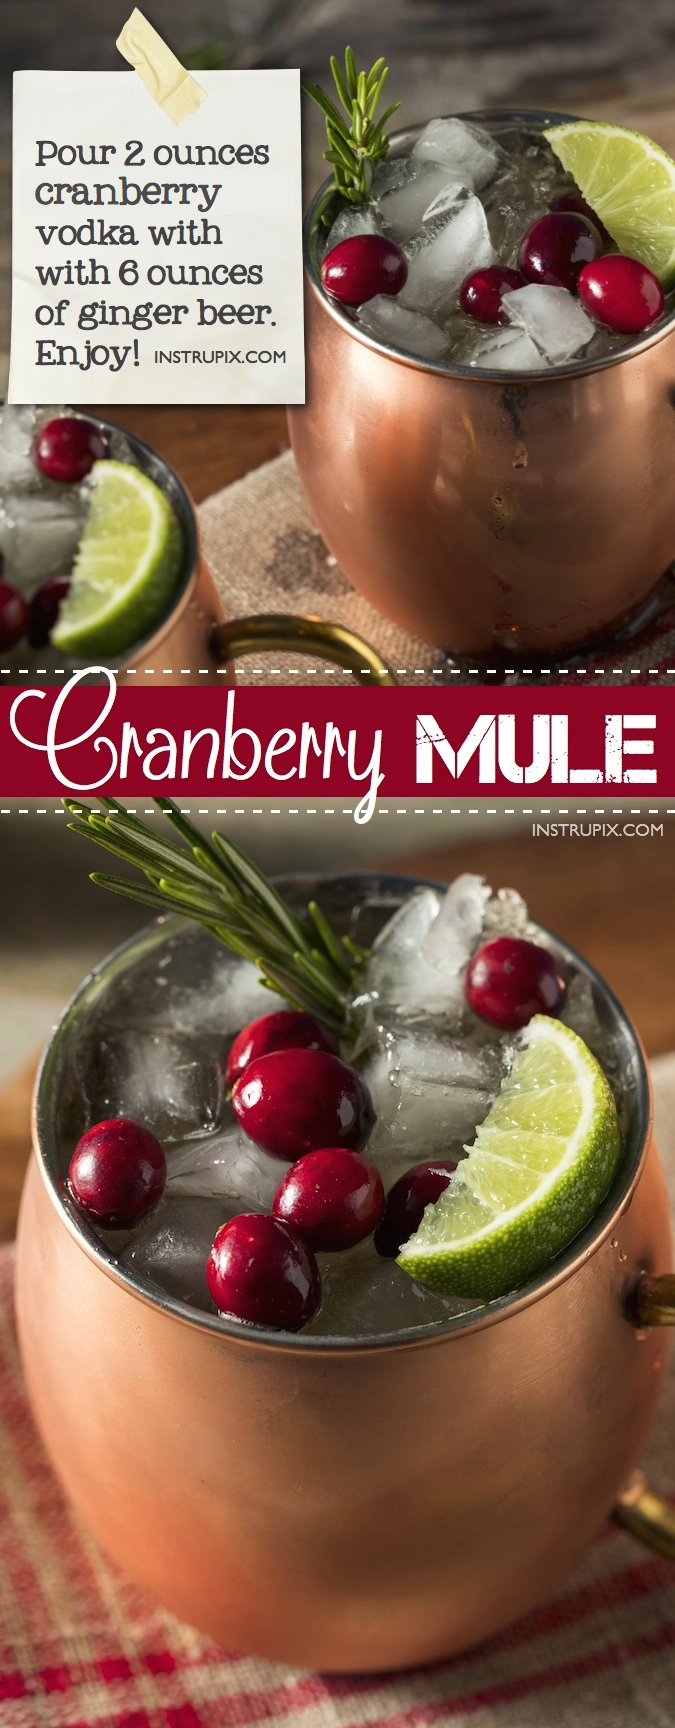 Christmas Cranberry Moscow Mule Recipe | 6 easy holiday cocktail recipes using just 2 ingredients! All made with alcohol for adults. These drinks are perfect for Christmas or Thanksgiving, and super easy for a crowd. A variety of whiskey, vodka and wine. Instrupix.com